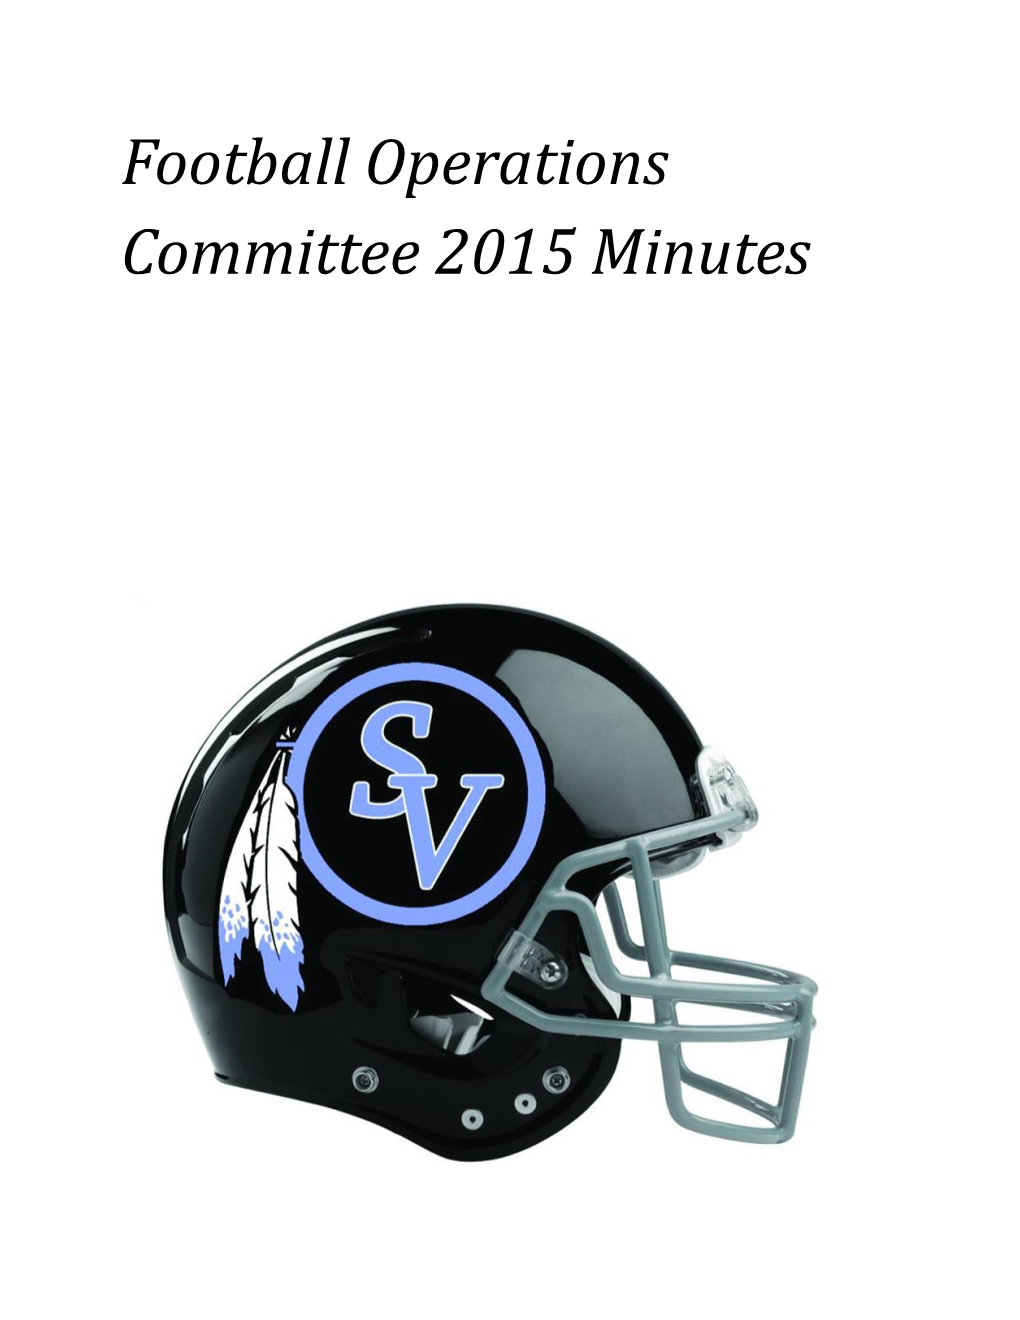 Football Operations Committee 2015 Minutes